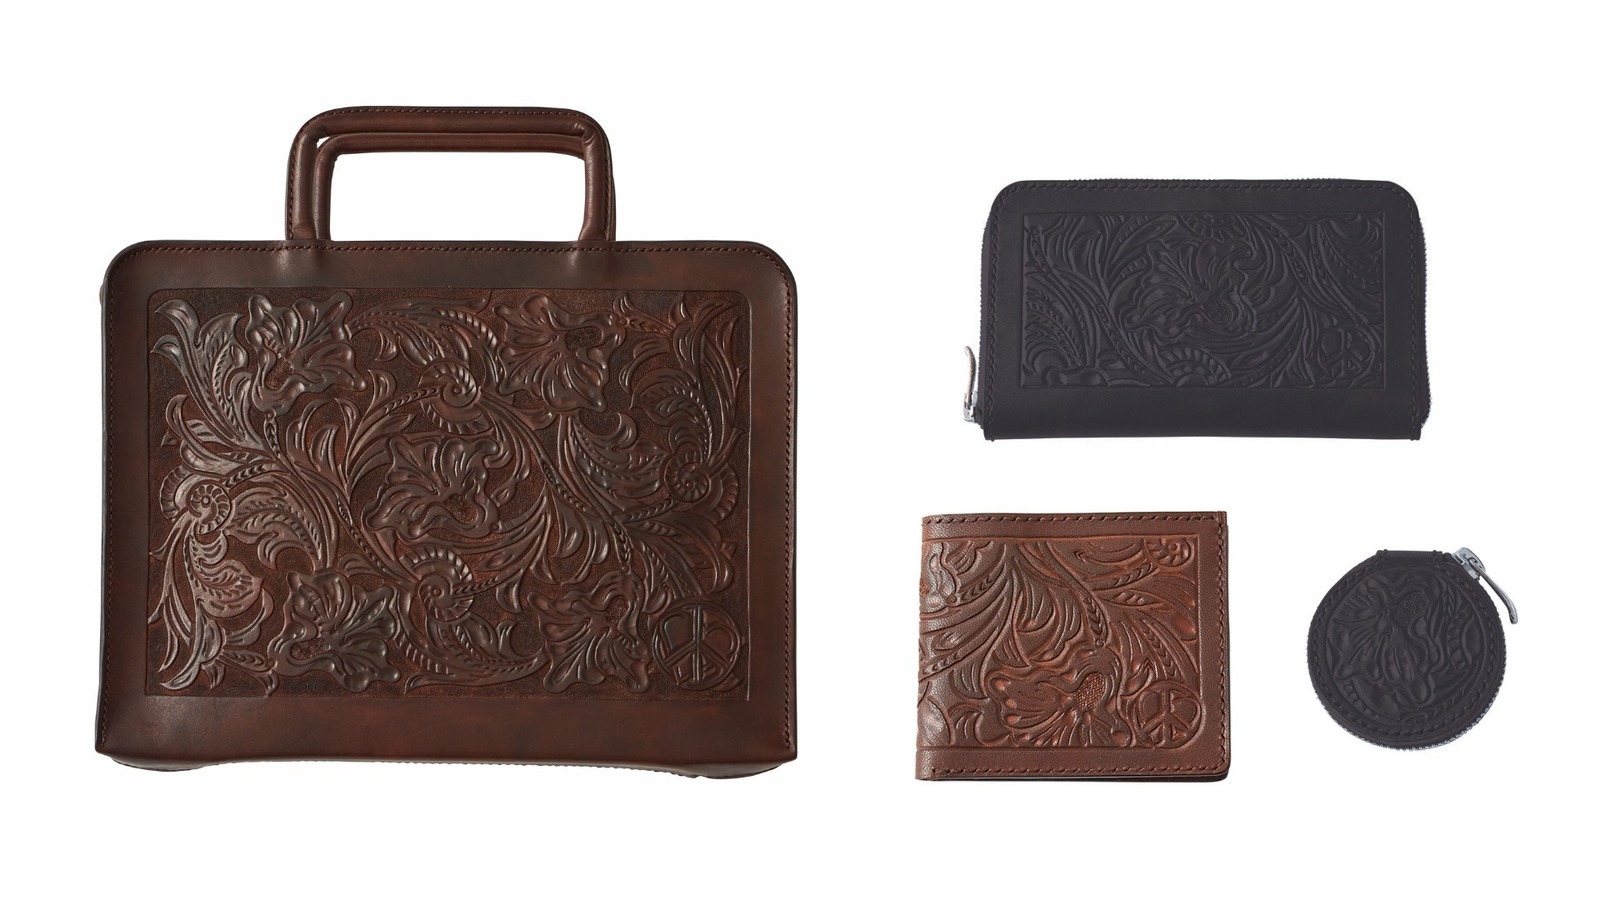 「HAND CARVED LEATHER 天国と地獄 BRIEFCASE BY KICHIZO」242,000円
「HAND CARVED LEATHER 天国と地獄 LONG WALLET BY KICHIZO」126,500円
「HAND CARVED LEATHER 天国と地獄 WALLET BY KICHIZO」82,500円
「HAND CARVED LEATHER 天国と地獄 COIN CASE BY KICHIZO」66,000円